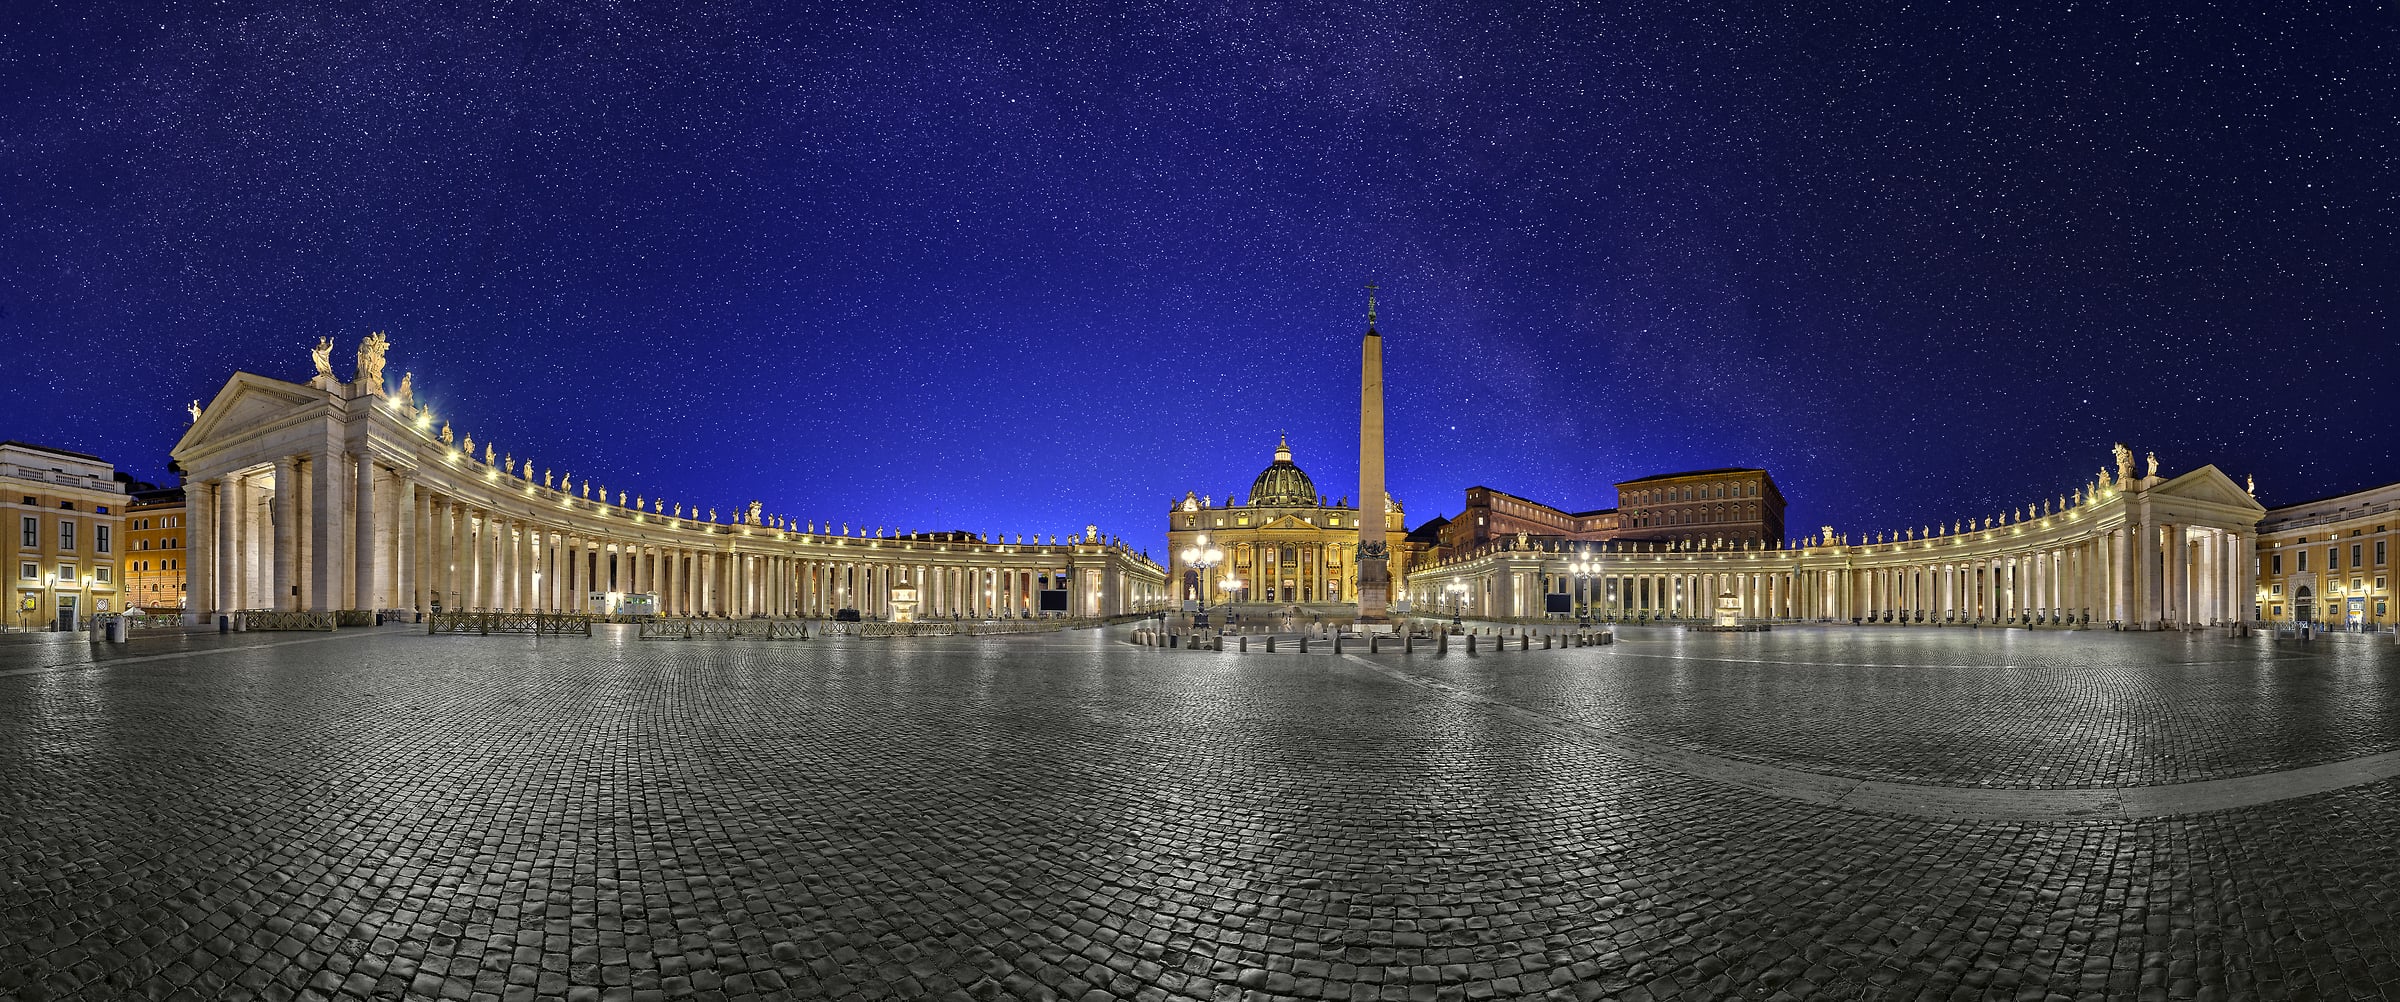 360 megapixels! A very high resolution, large-format VAST photo print of Saint Peter's Square; photograph created by David Meaux in Vatican City, the Holy See.